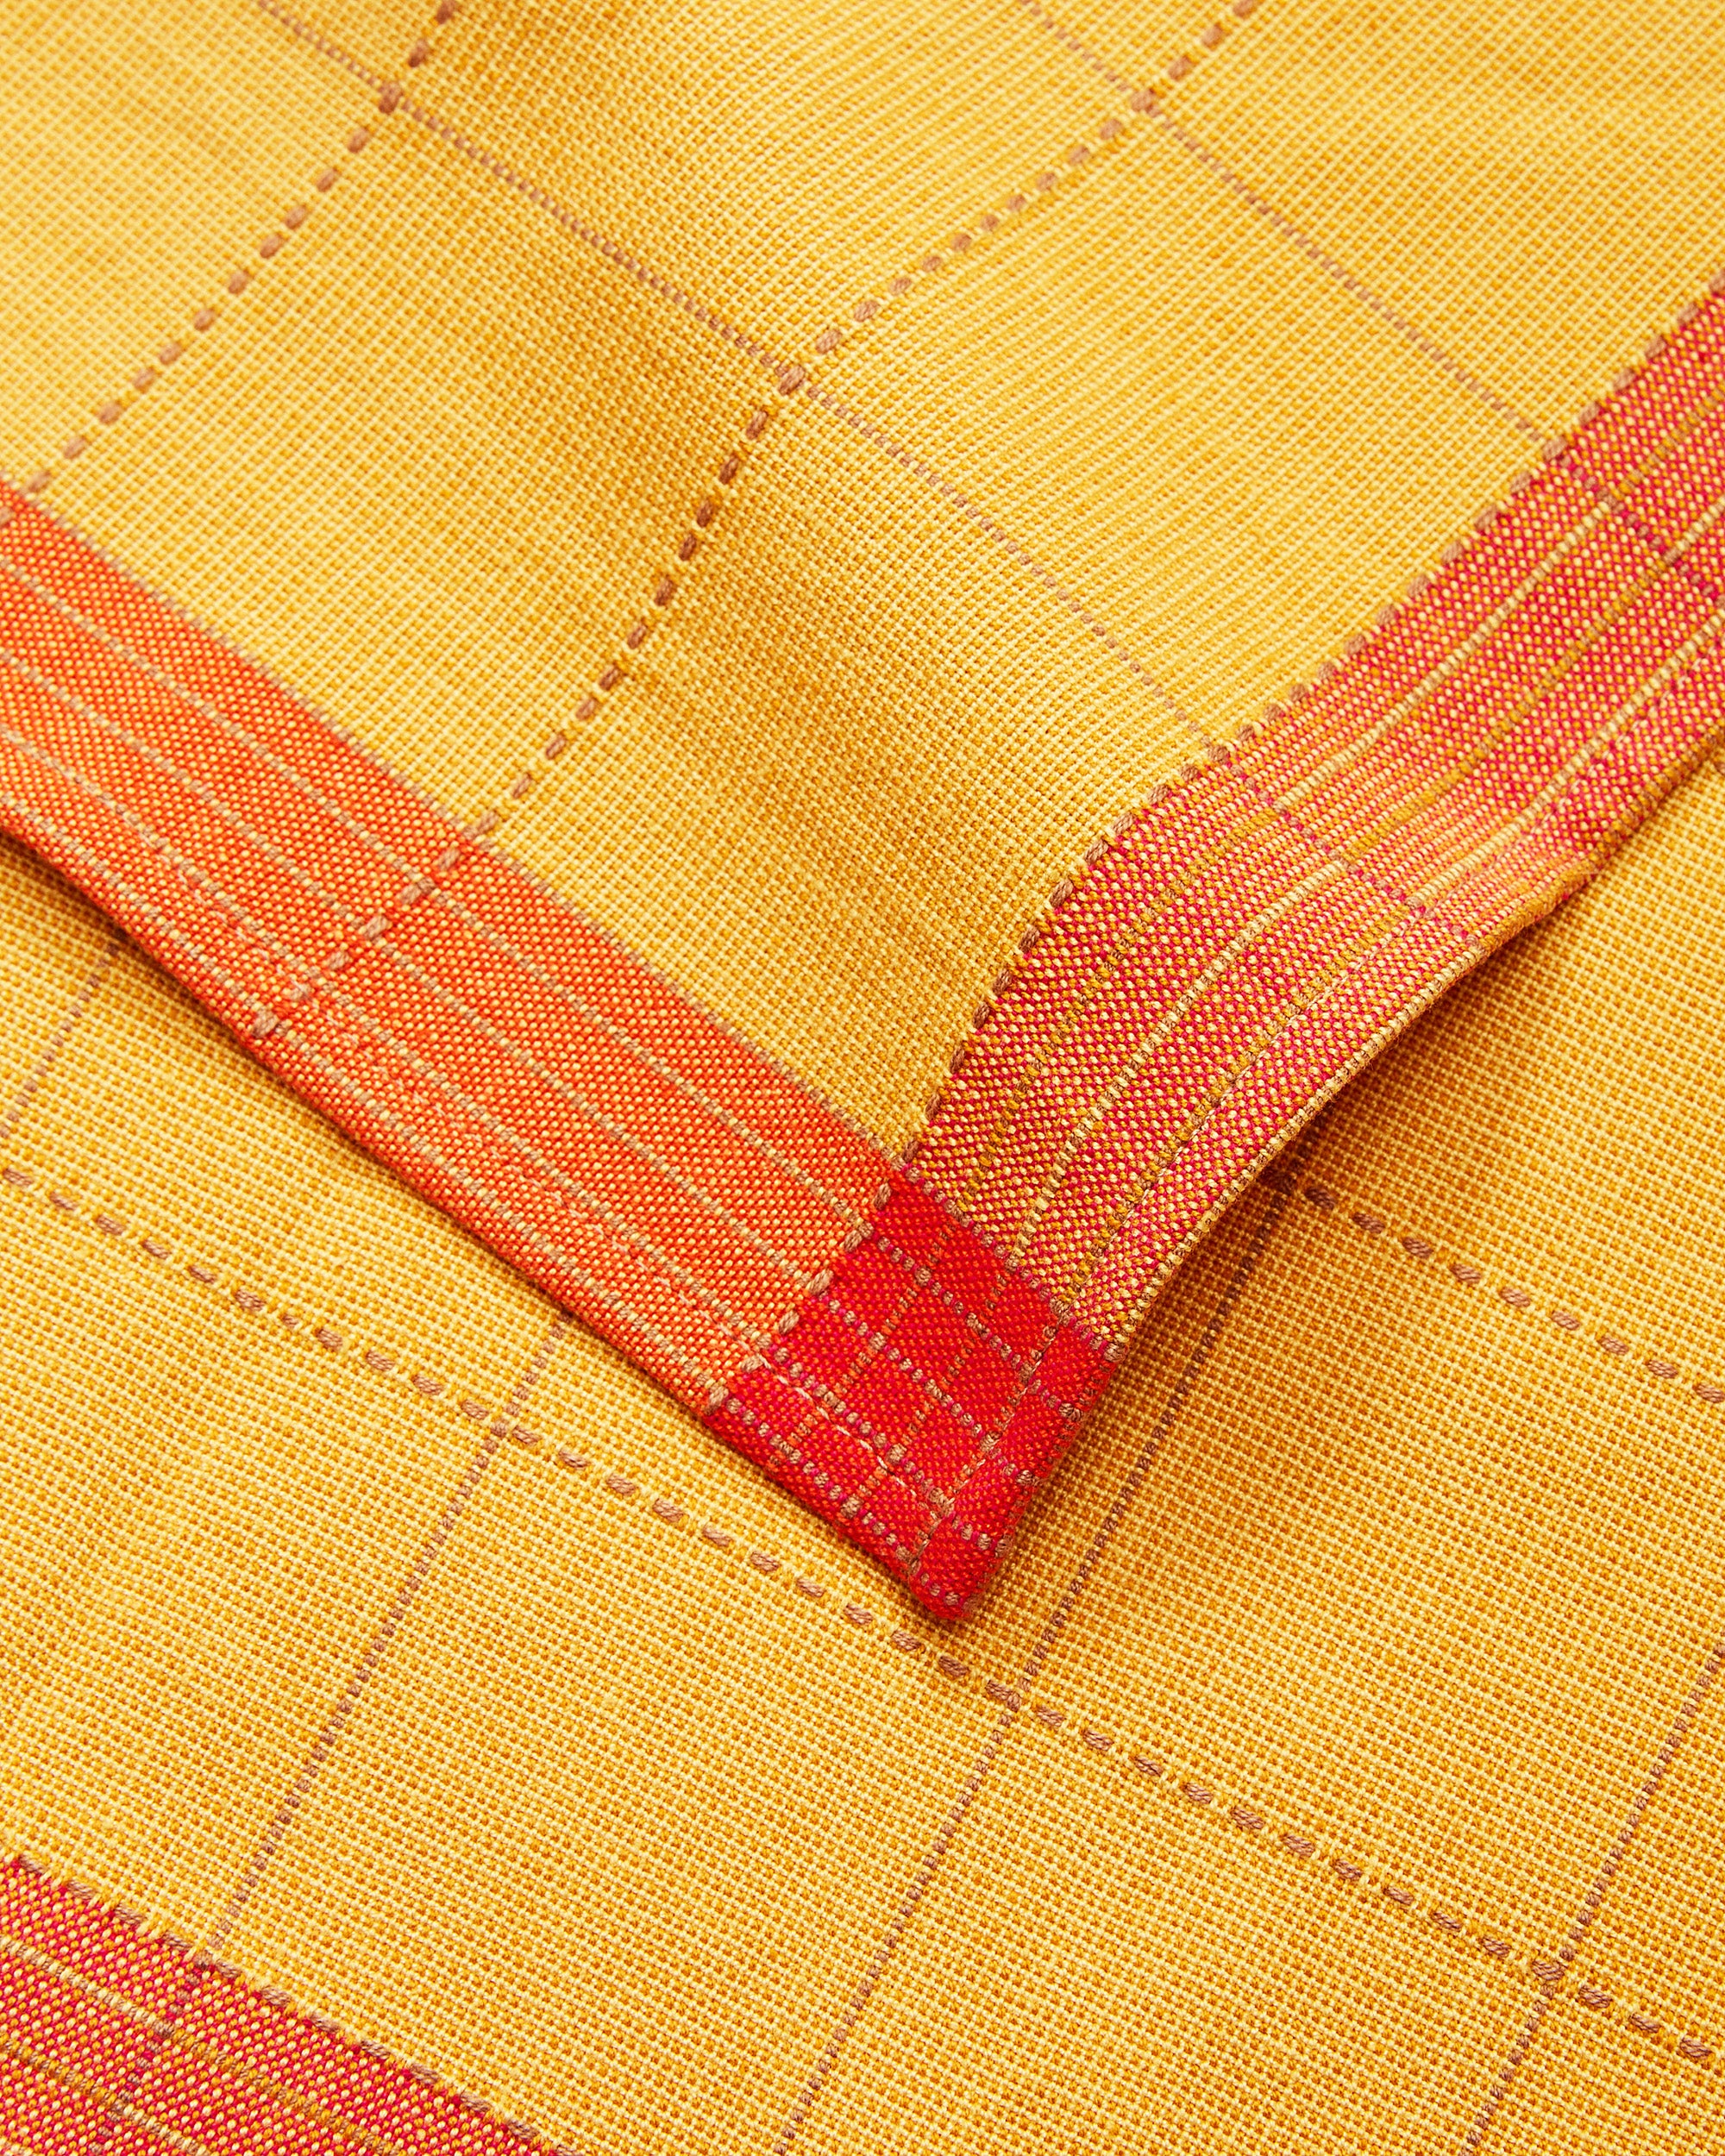 Ethically Handwoven Textile Cotton Napkin by MINNA - close-up of the Goldfinch bright yellow and orange colorway